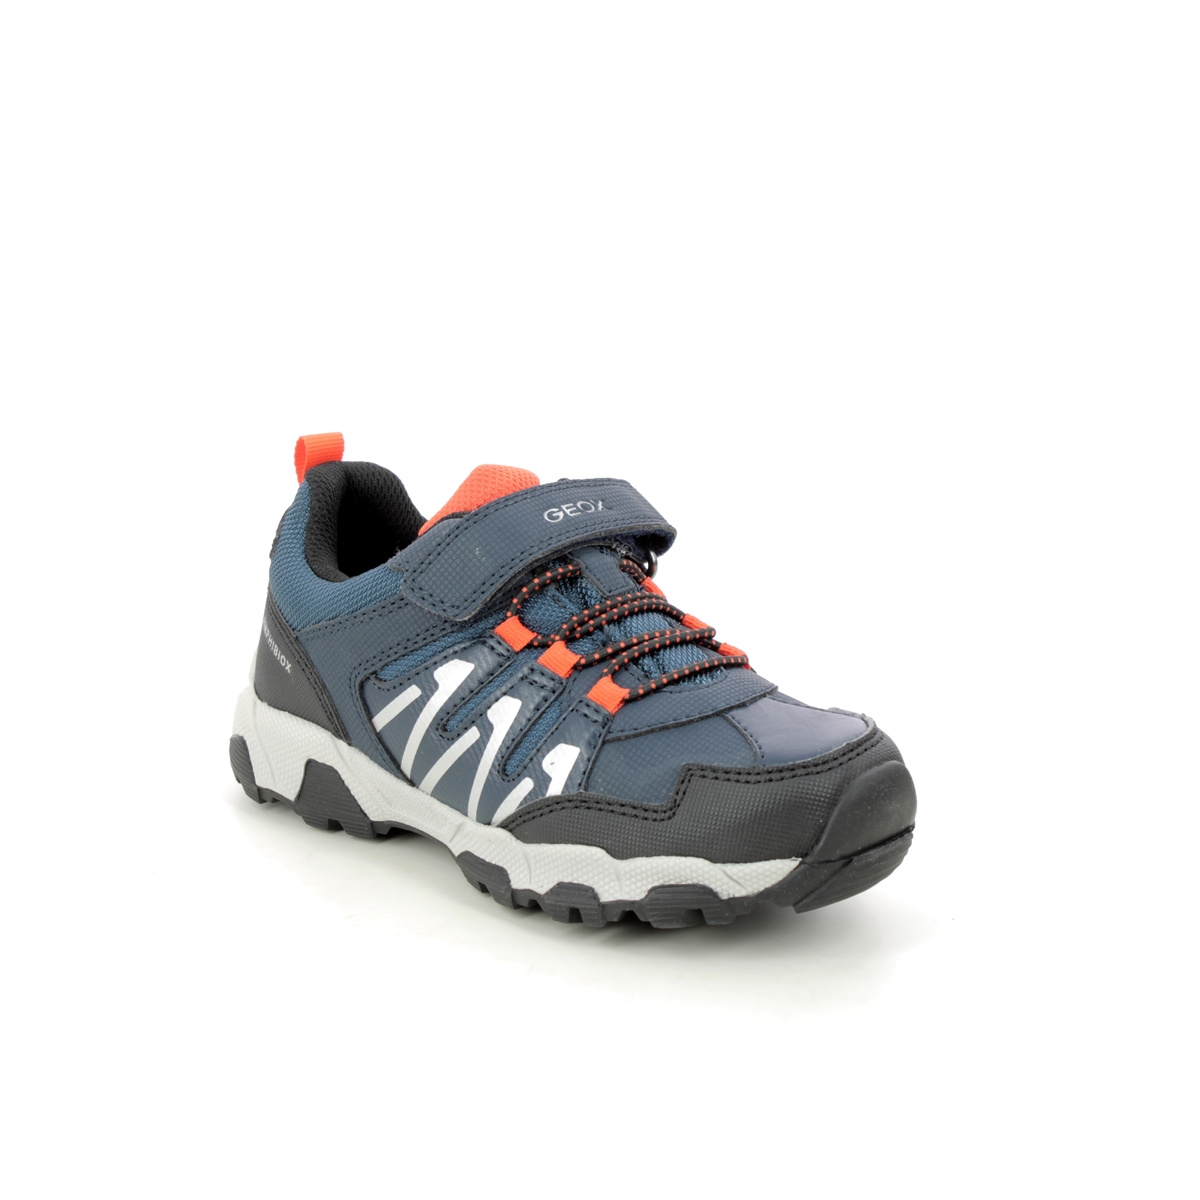 Geox - Magnetar Tex Bungee (Navy) J263Zb-C0820 In Size 34 In Plain Navy For kids